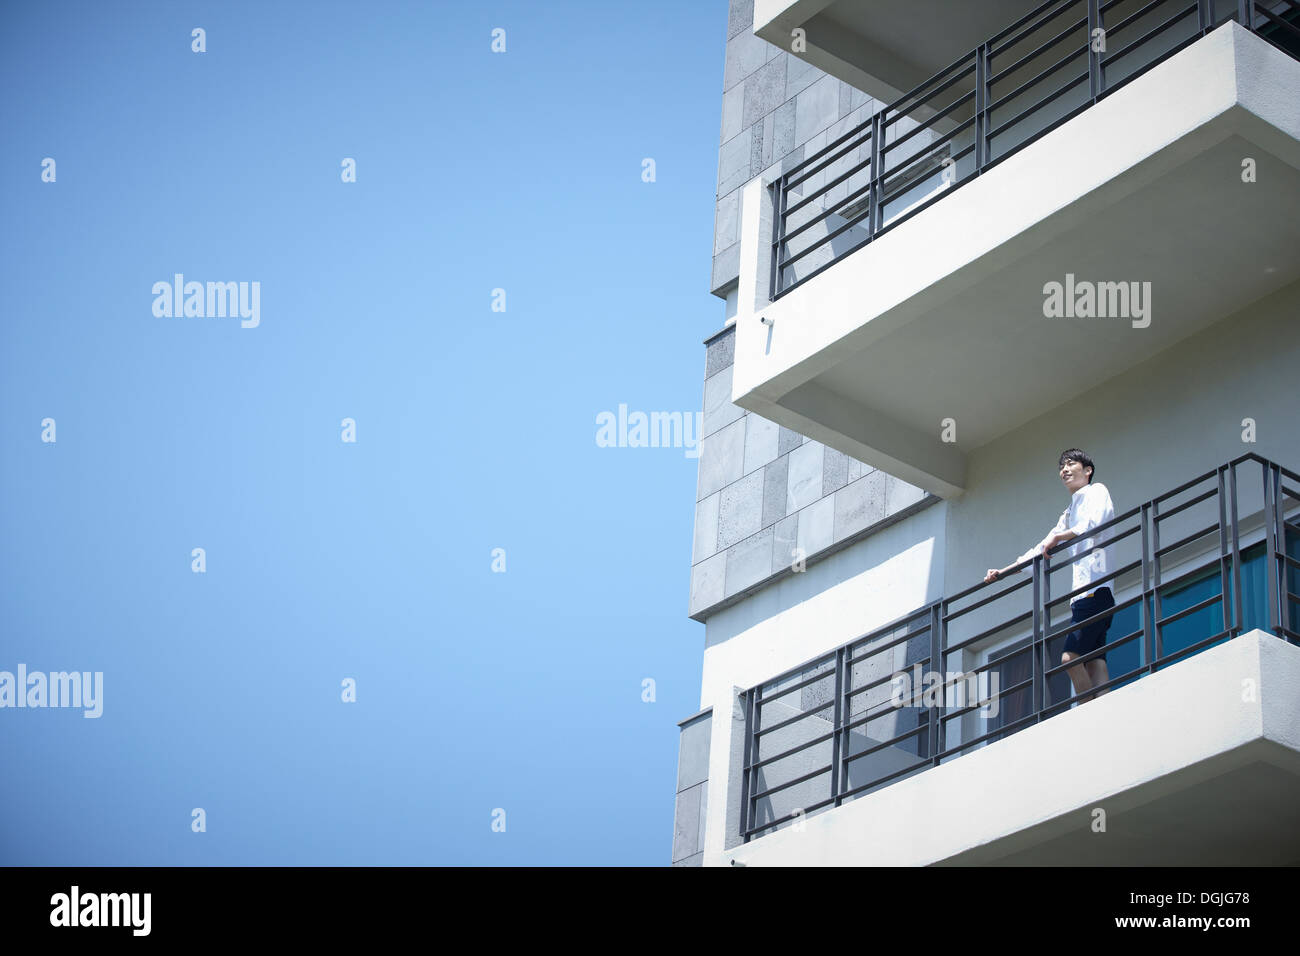 a man standing on a balcony Stock Photo